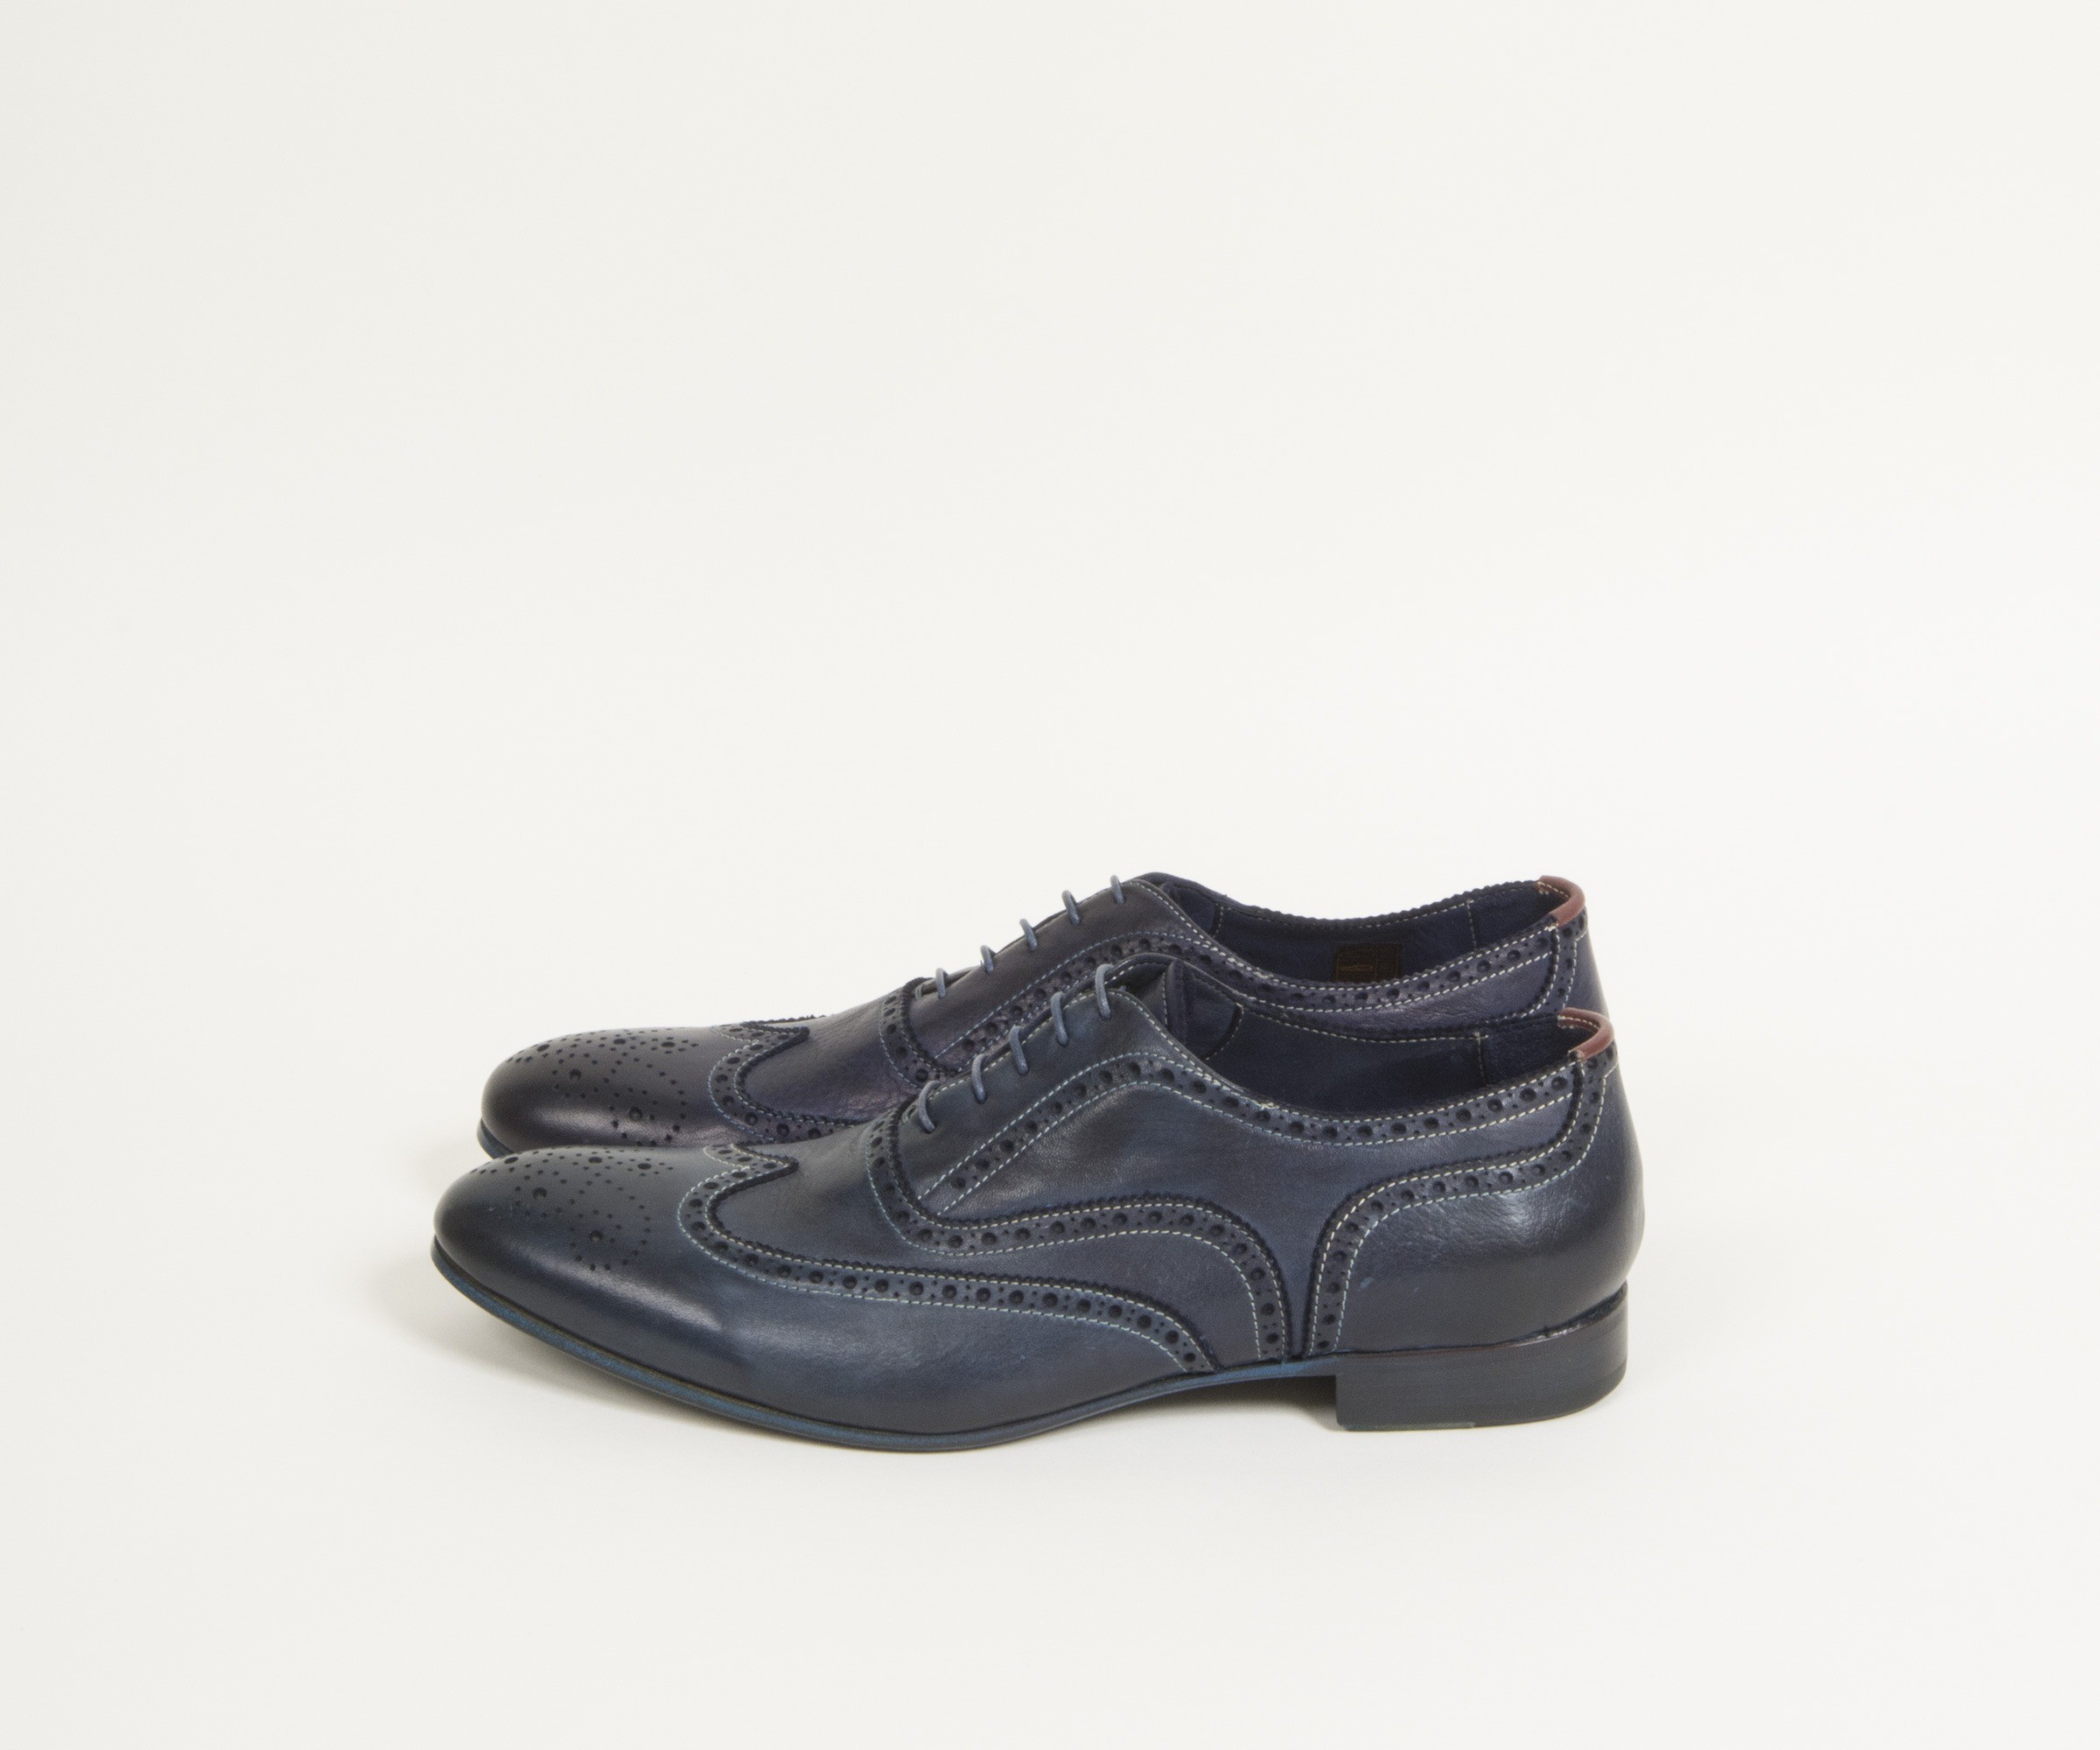 Paul Smith Shoes Hand Burnished Miller Brogue Blue (Damaged)